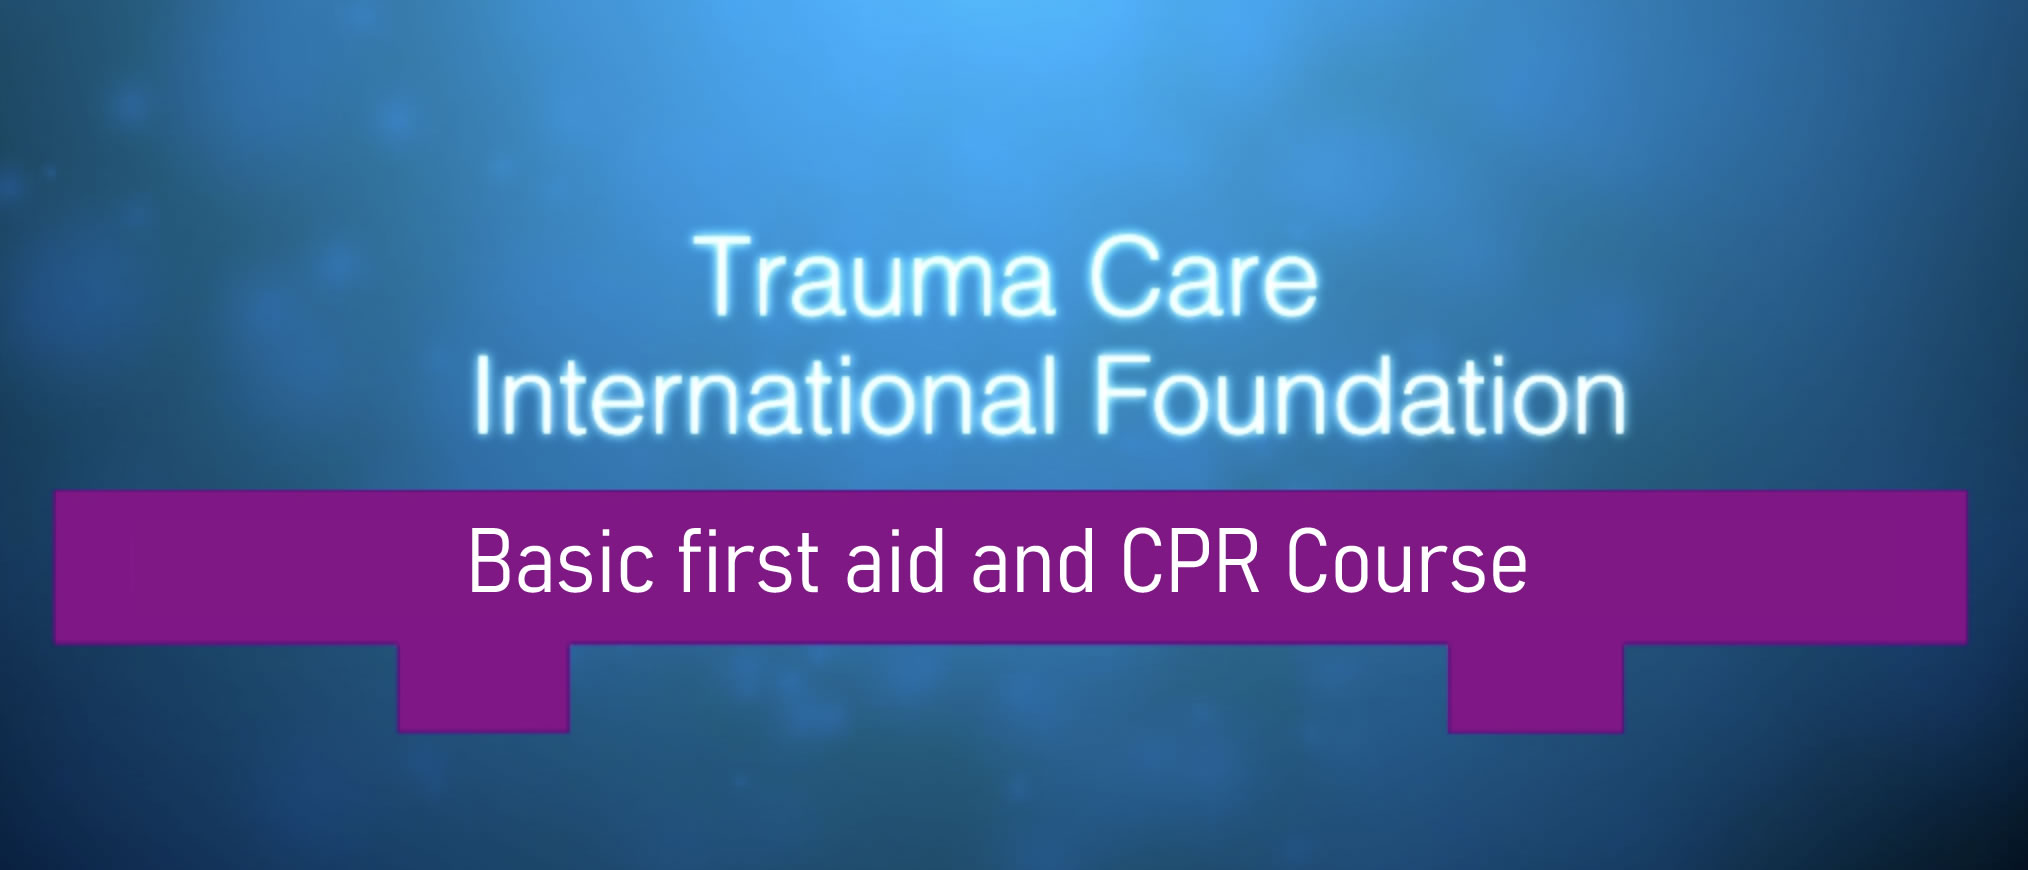 Basic first aid and CPR Course